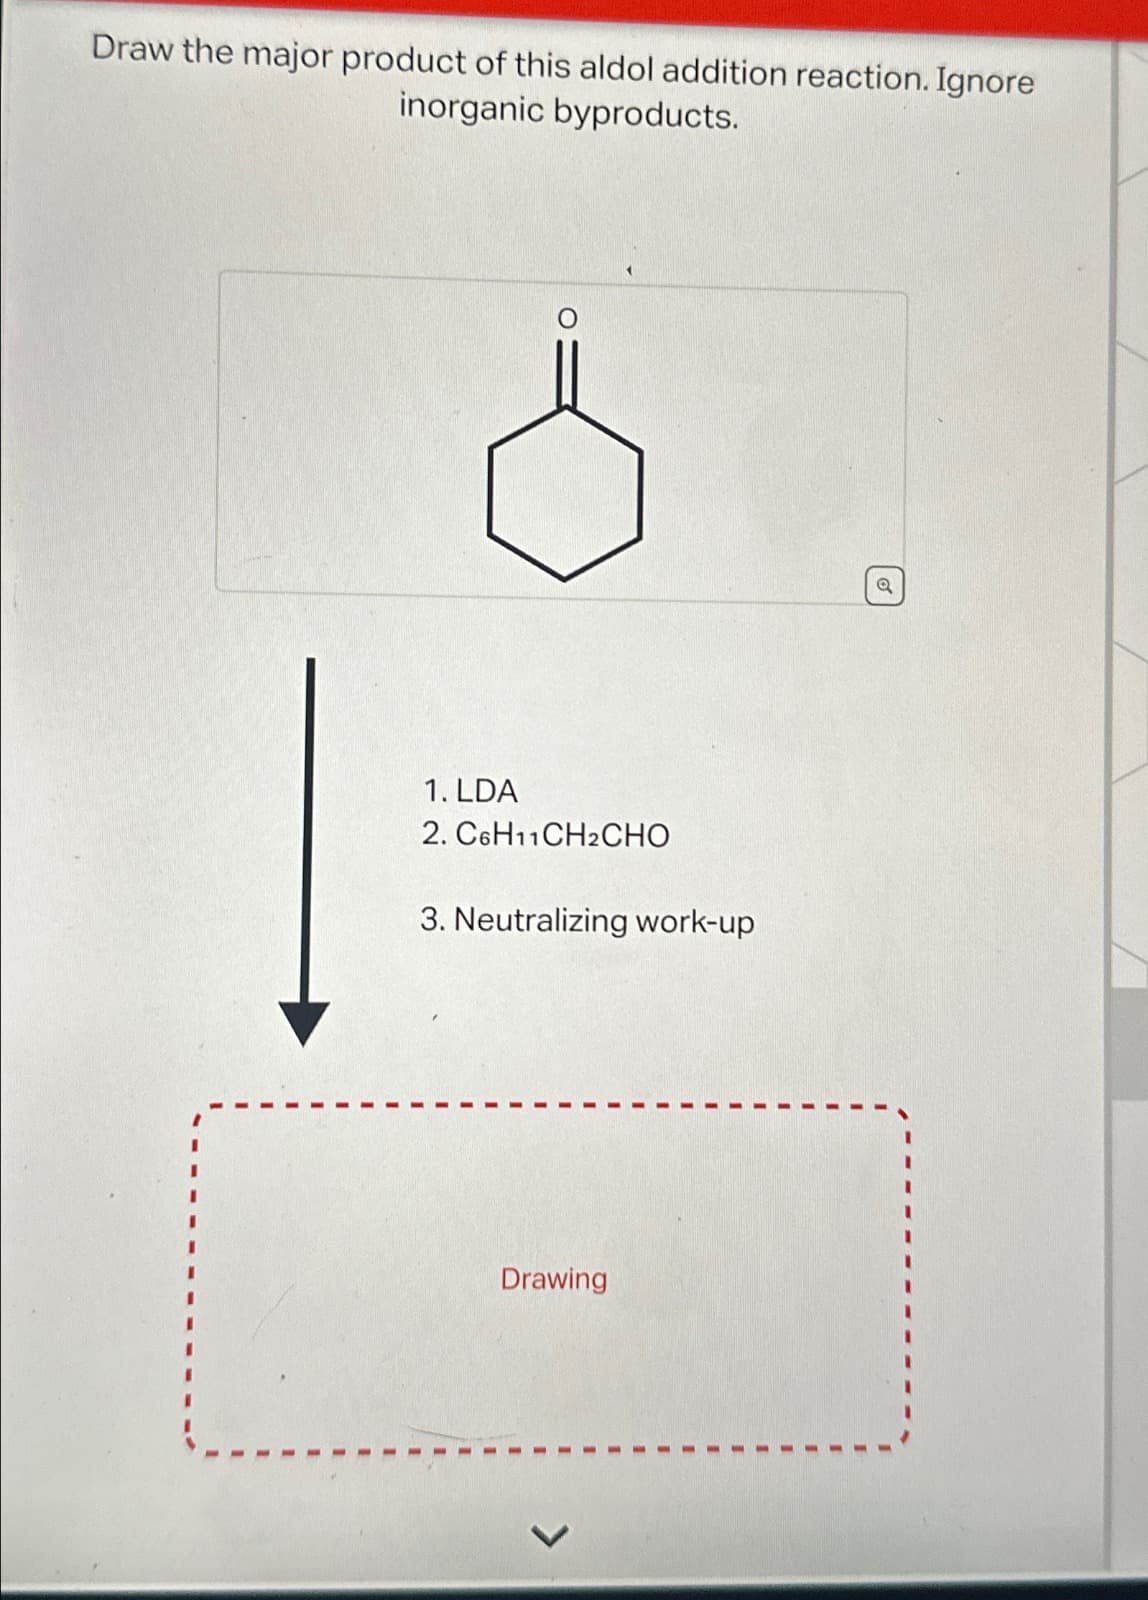 Draw the major product of this aldol addition reaction. Ignore
inorganic byproducts.
1. LDA
2. C6H11CH2CHO
3. Neutralizing work-up
Drawing
Q